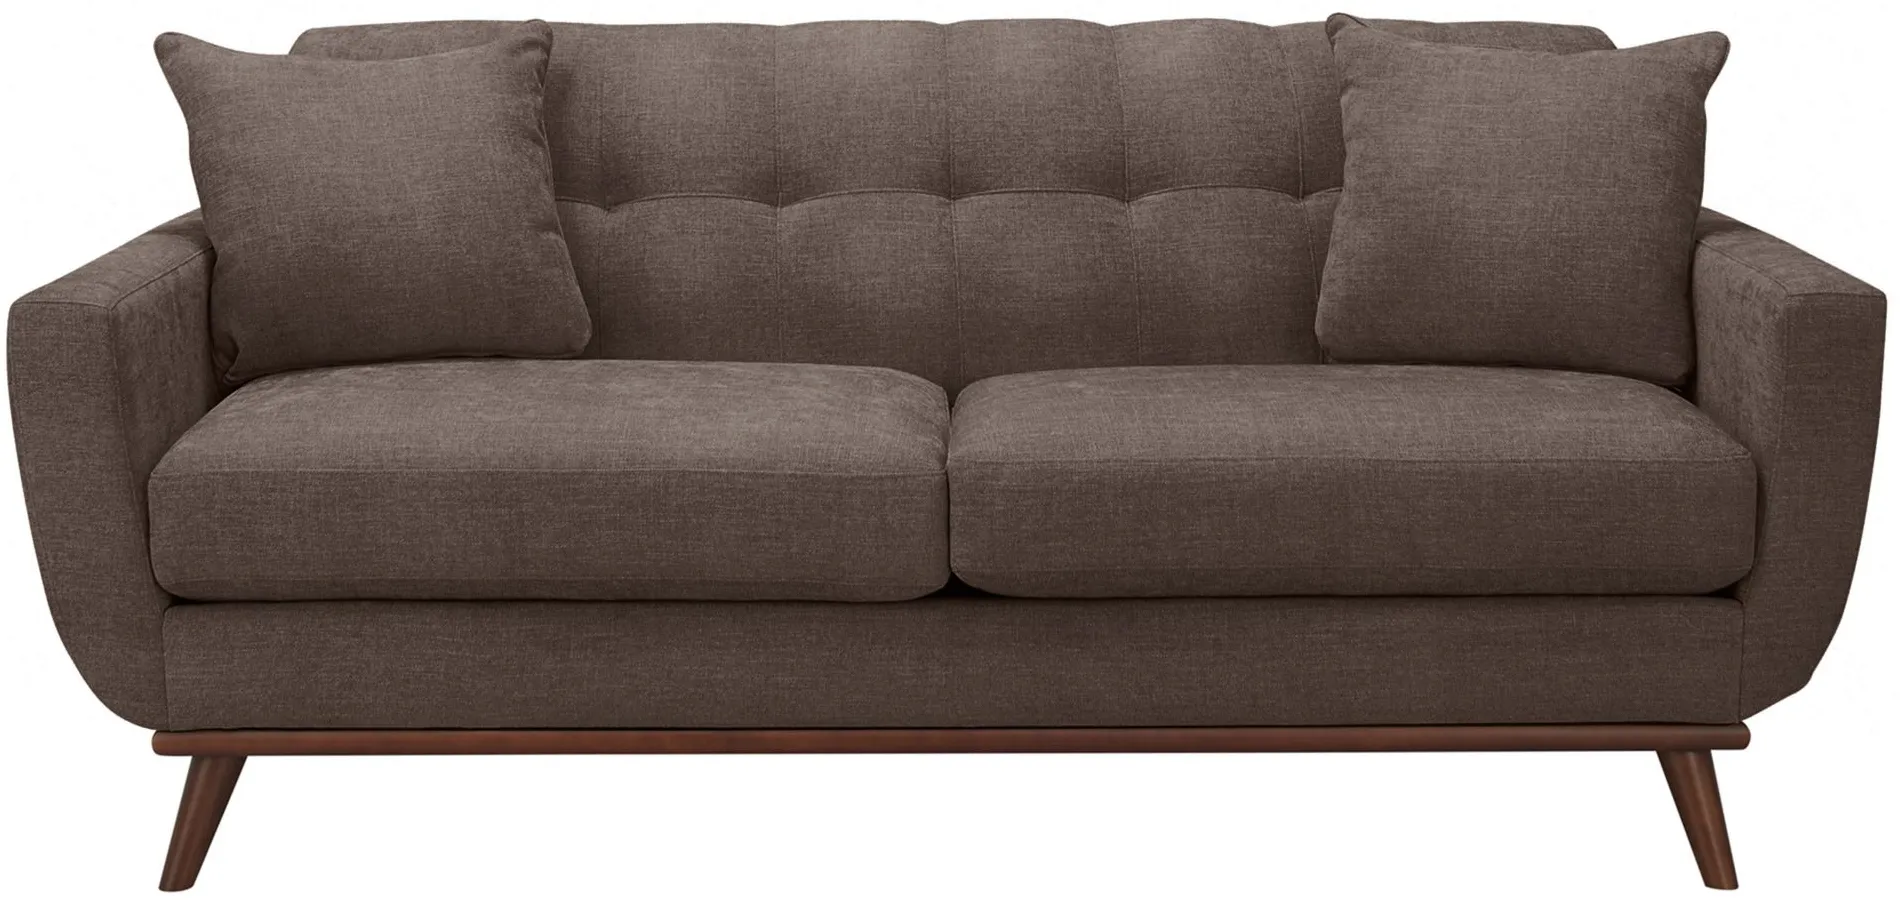 Milo Apartment Sofa in Suede-So-Soft Chocolate by H.M. Richards